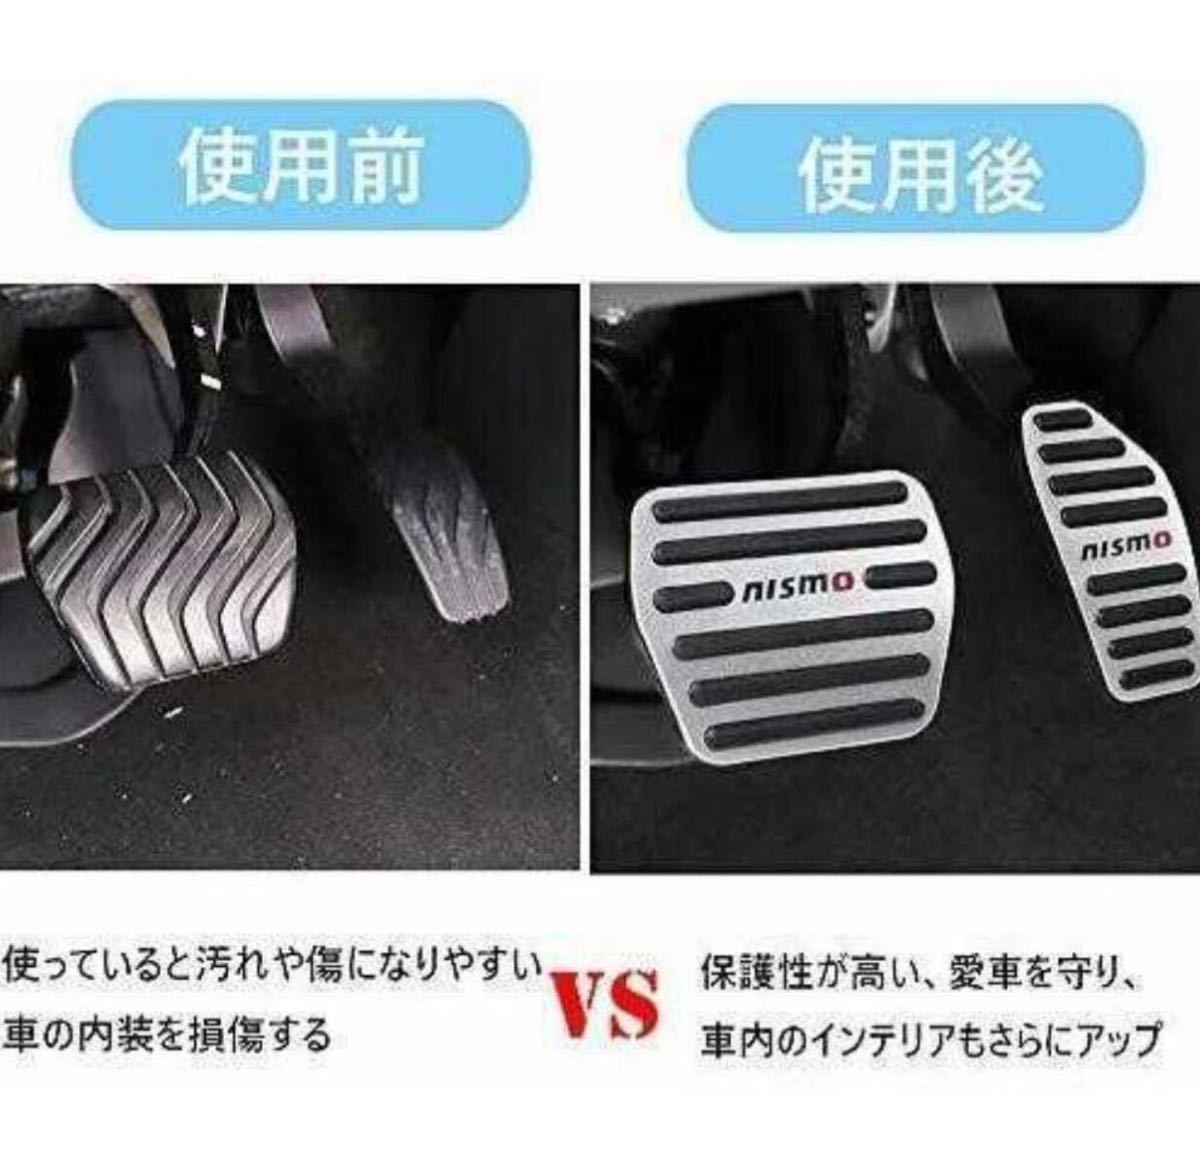 NISMO Nissan aluminum pedal brake accelerator cover Serena C27 series X-trail T32 Dayz B40 series Roox B40 group . included type 